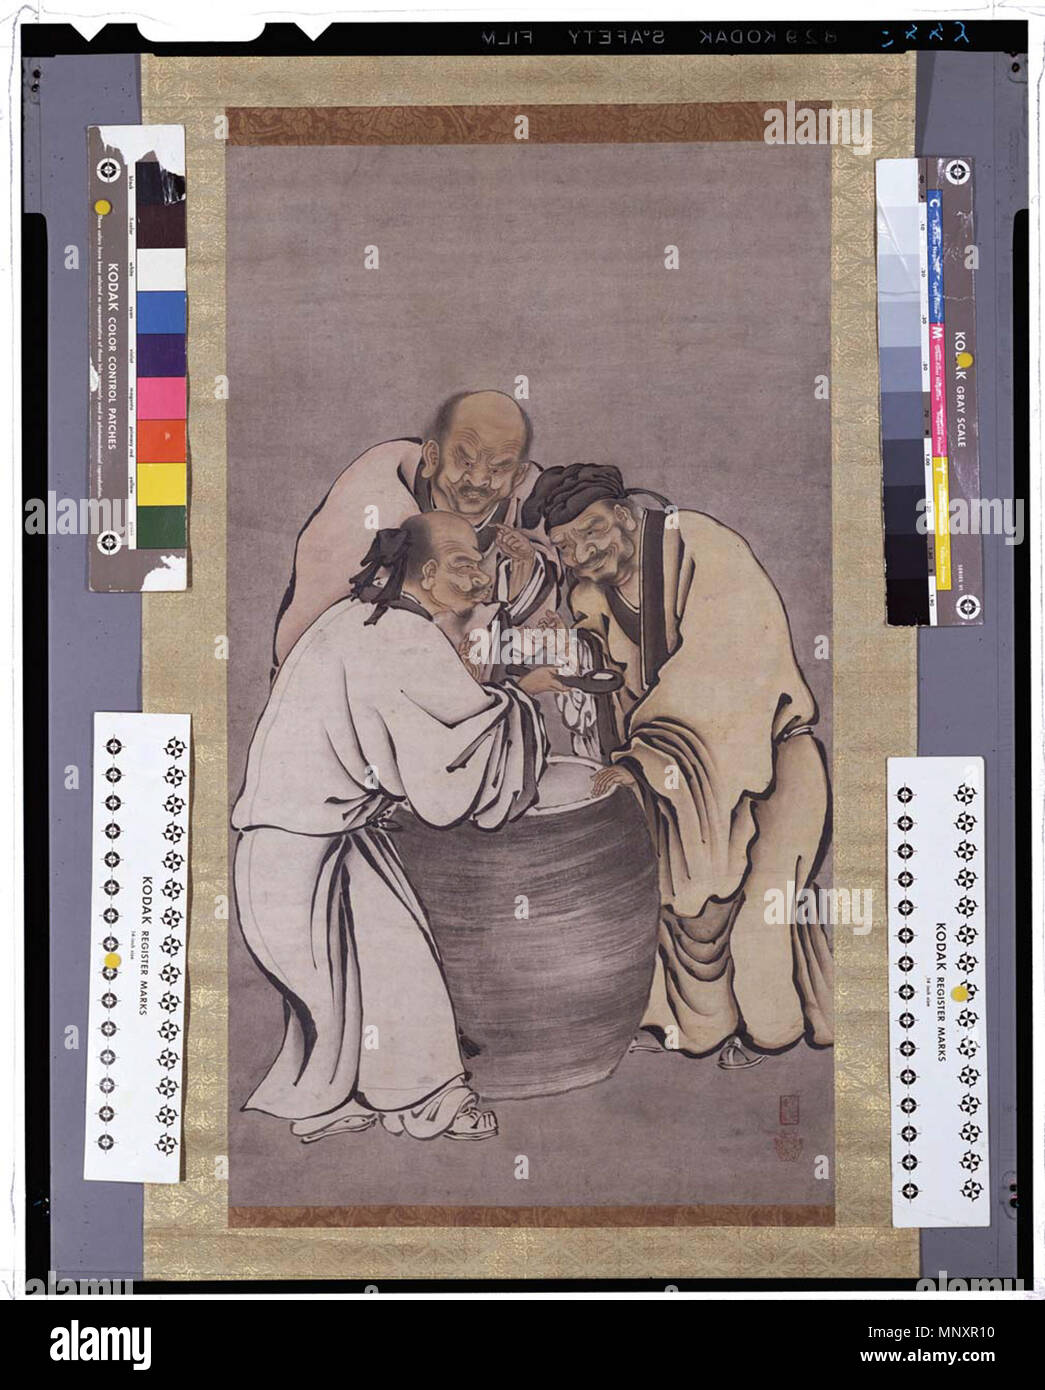 . English: The Three Vinegar Tasters, 16th-century Japanese painting by an artist of the Kanō school during the Mromachi period. 83.3×47.5 cm Represents Confucius, Gautama Buddha, and Laozi, symbolizing the unity of Confucianism, Buddhism, and Taoism. 日本語: 三聖吸酸図 狩野派 室町時代 . 16th century. Kanō school artist 1182 The Three Vinegar Tasters Stock Photo